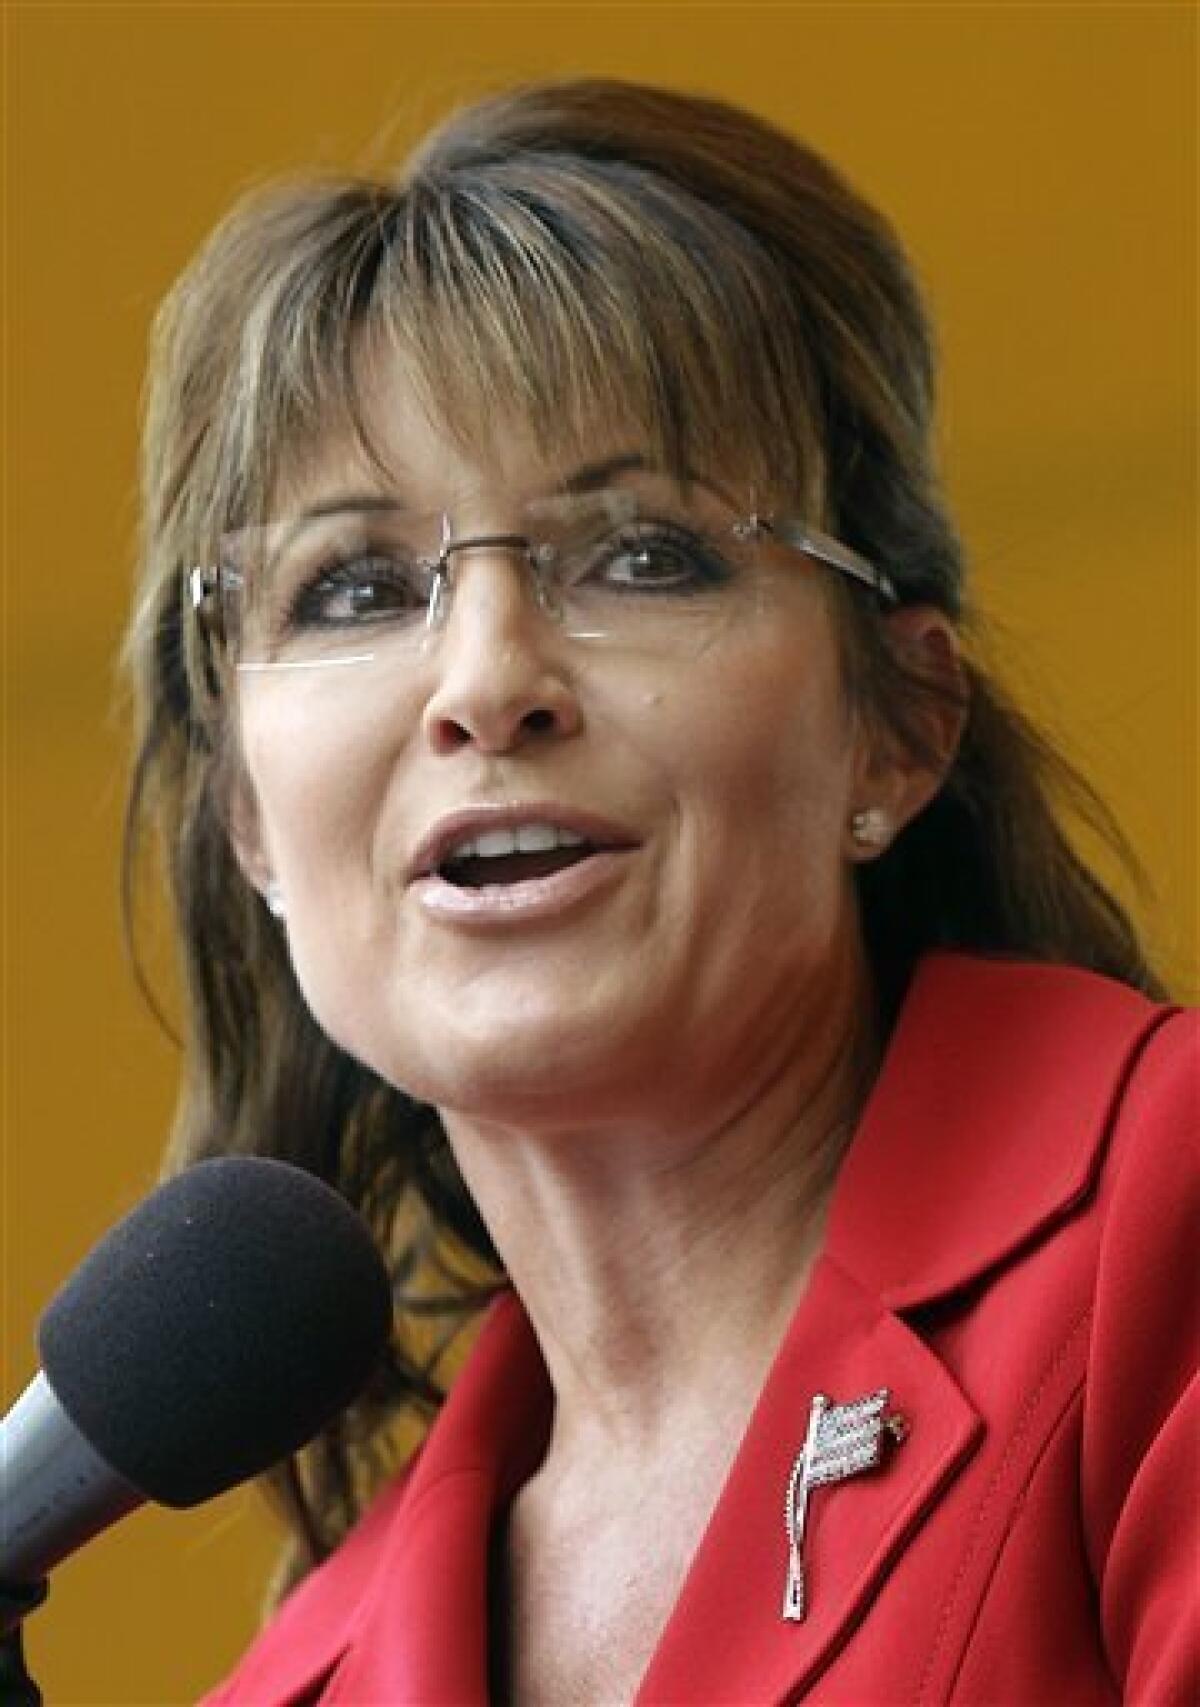 FILE - In this Sept. 5, 2011 file photo, former Republican vice presidential candidate and Alaska Gov. Sarah Palin speaks in Manchester, N.H. Palin said in a statement Wednesday, Oct. 5, 2011, that she is not running for president for 2012. (AP Photo/Stephan Savoia, File)